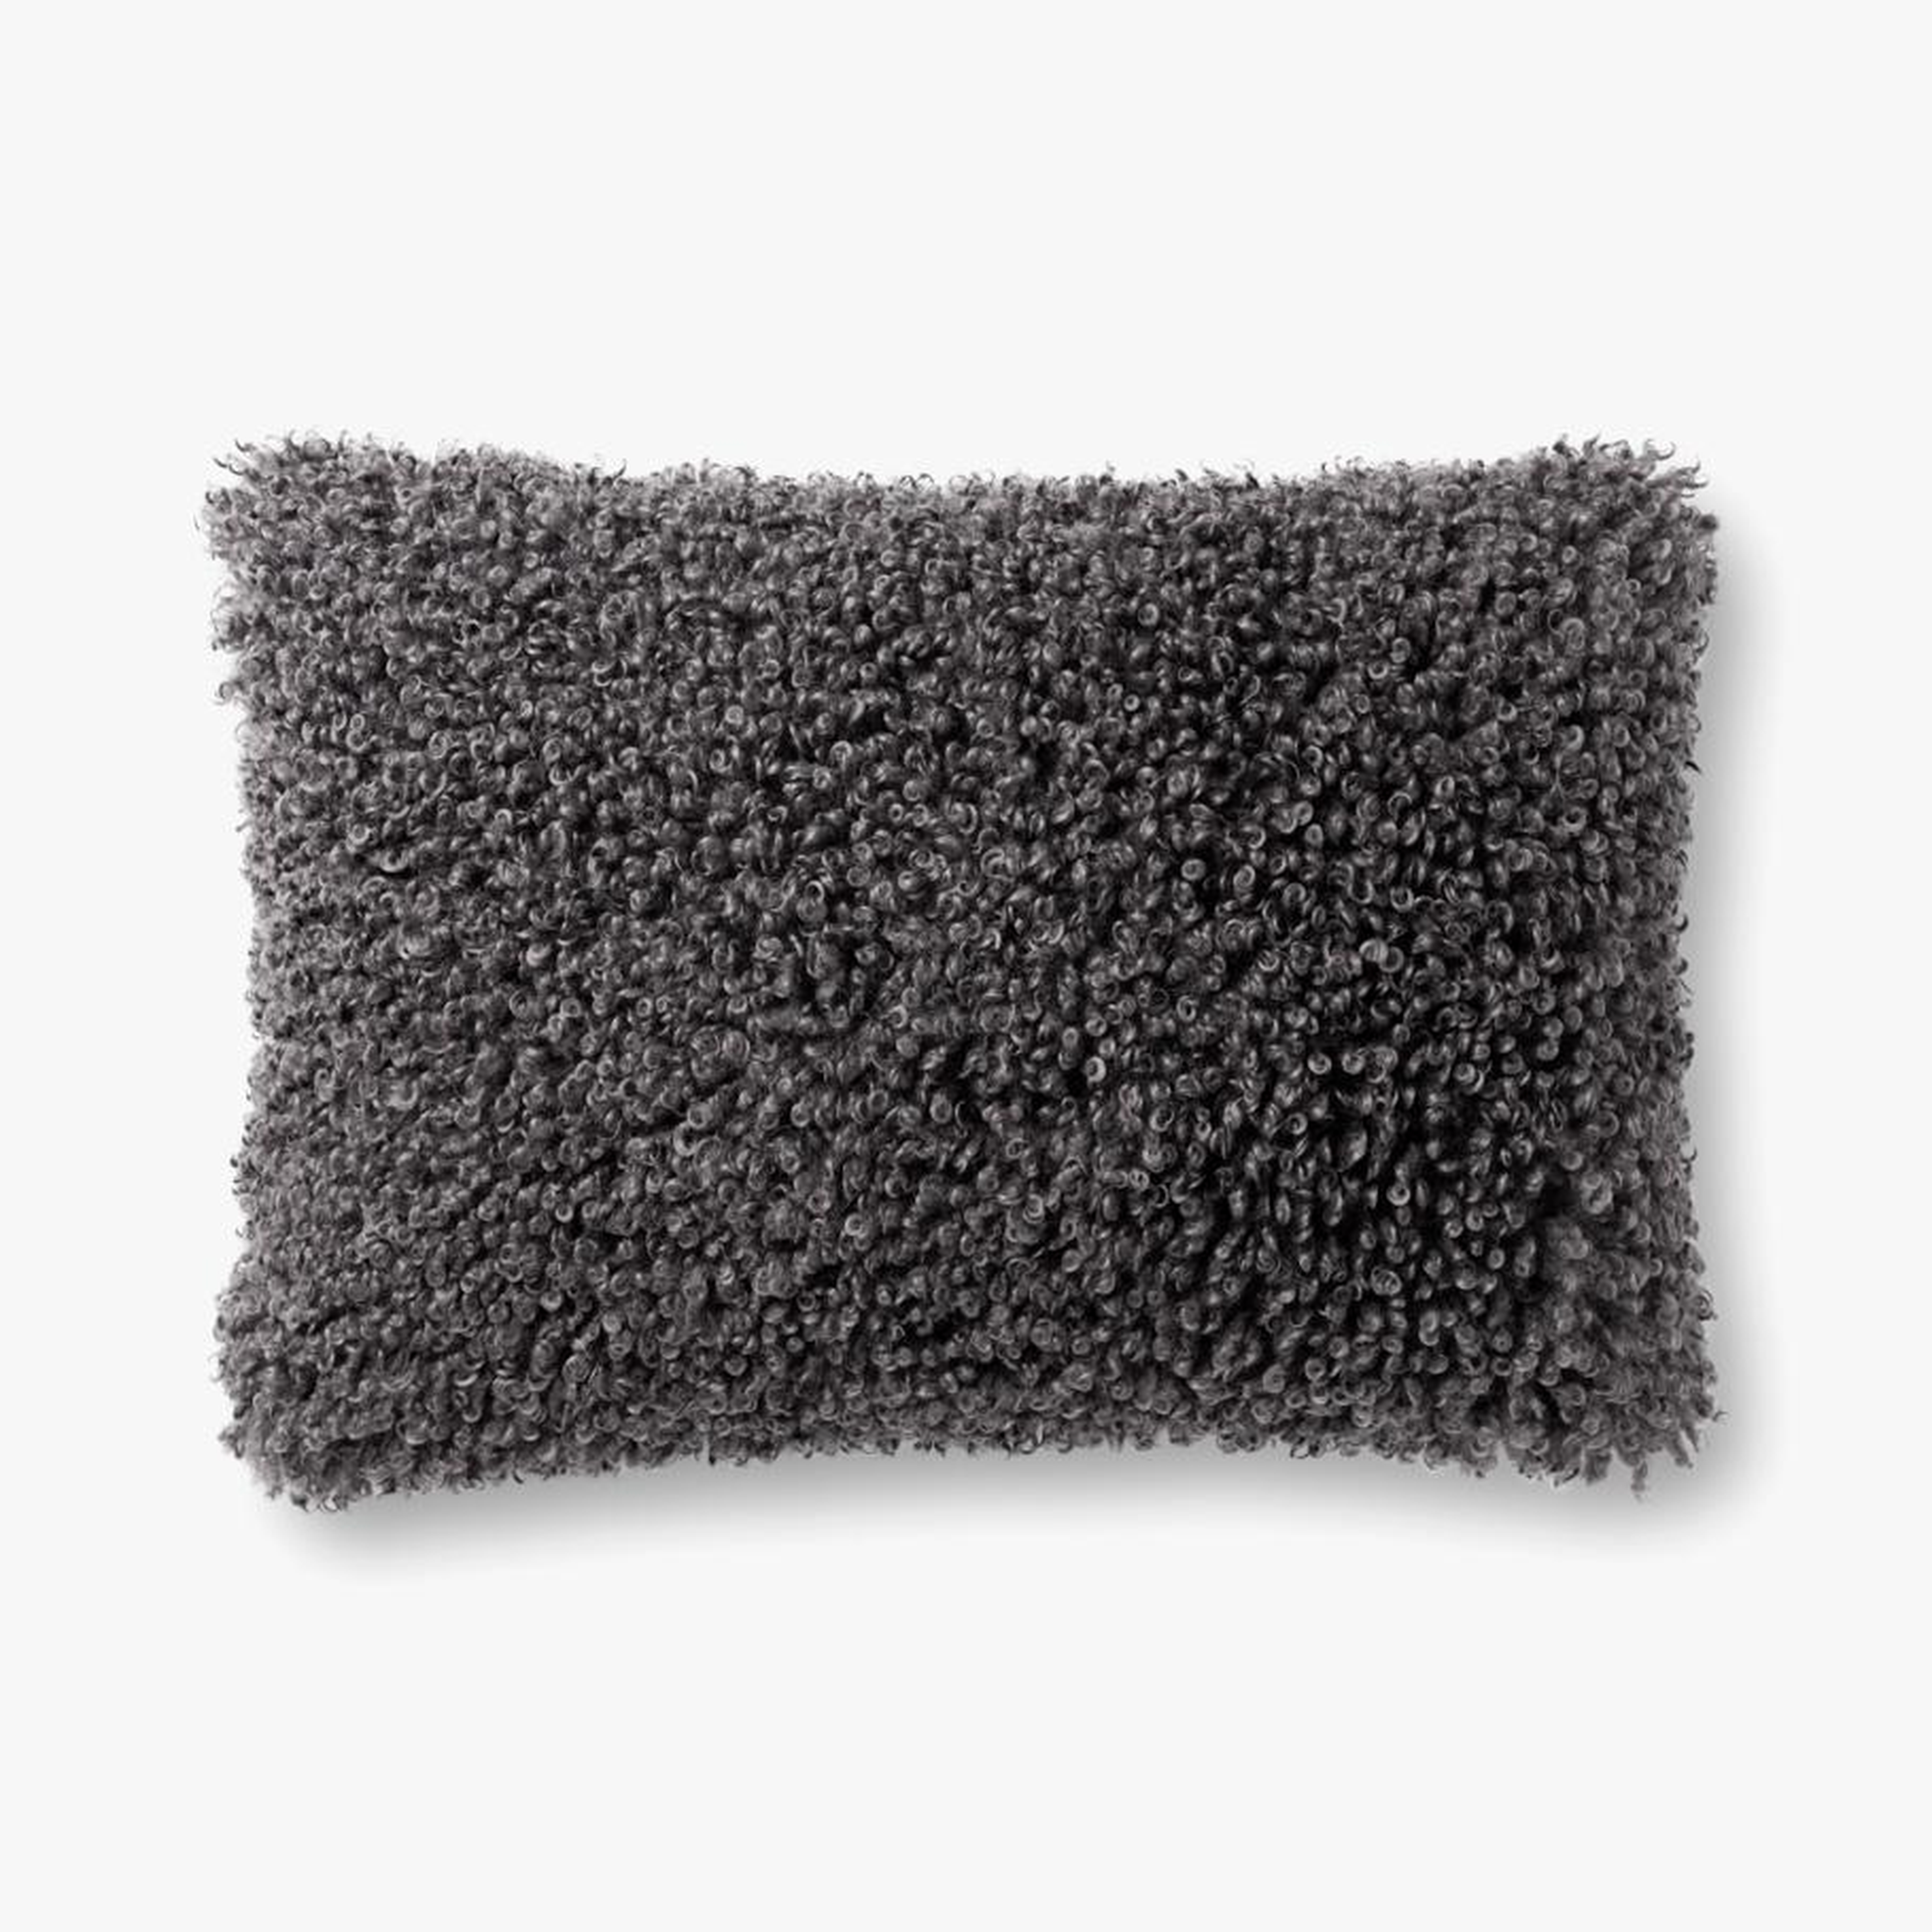 https://www.loloirugs.com/products/p0867-charcoal - Loloi Rugs